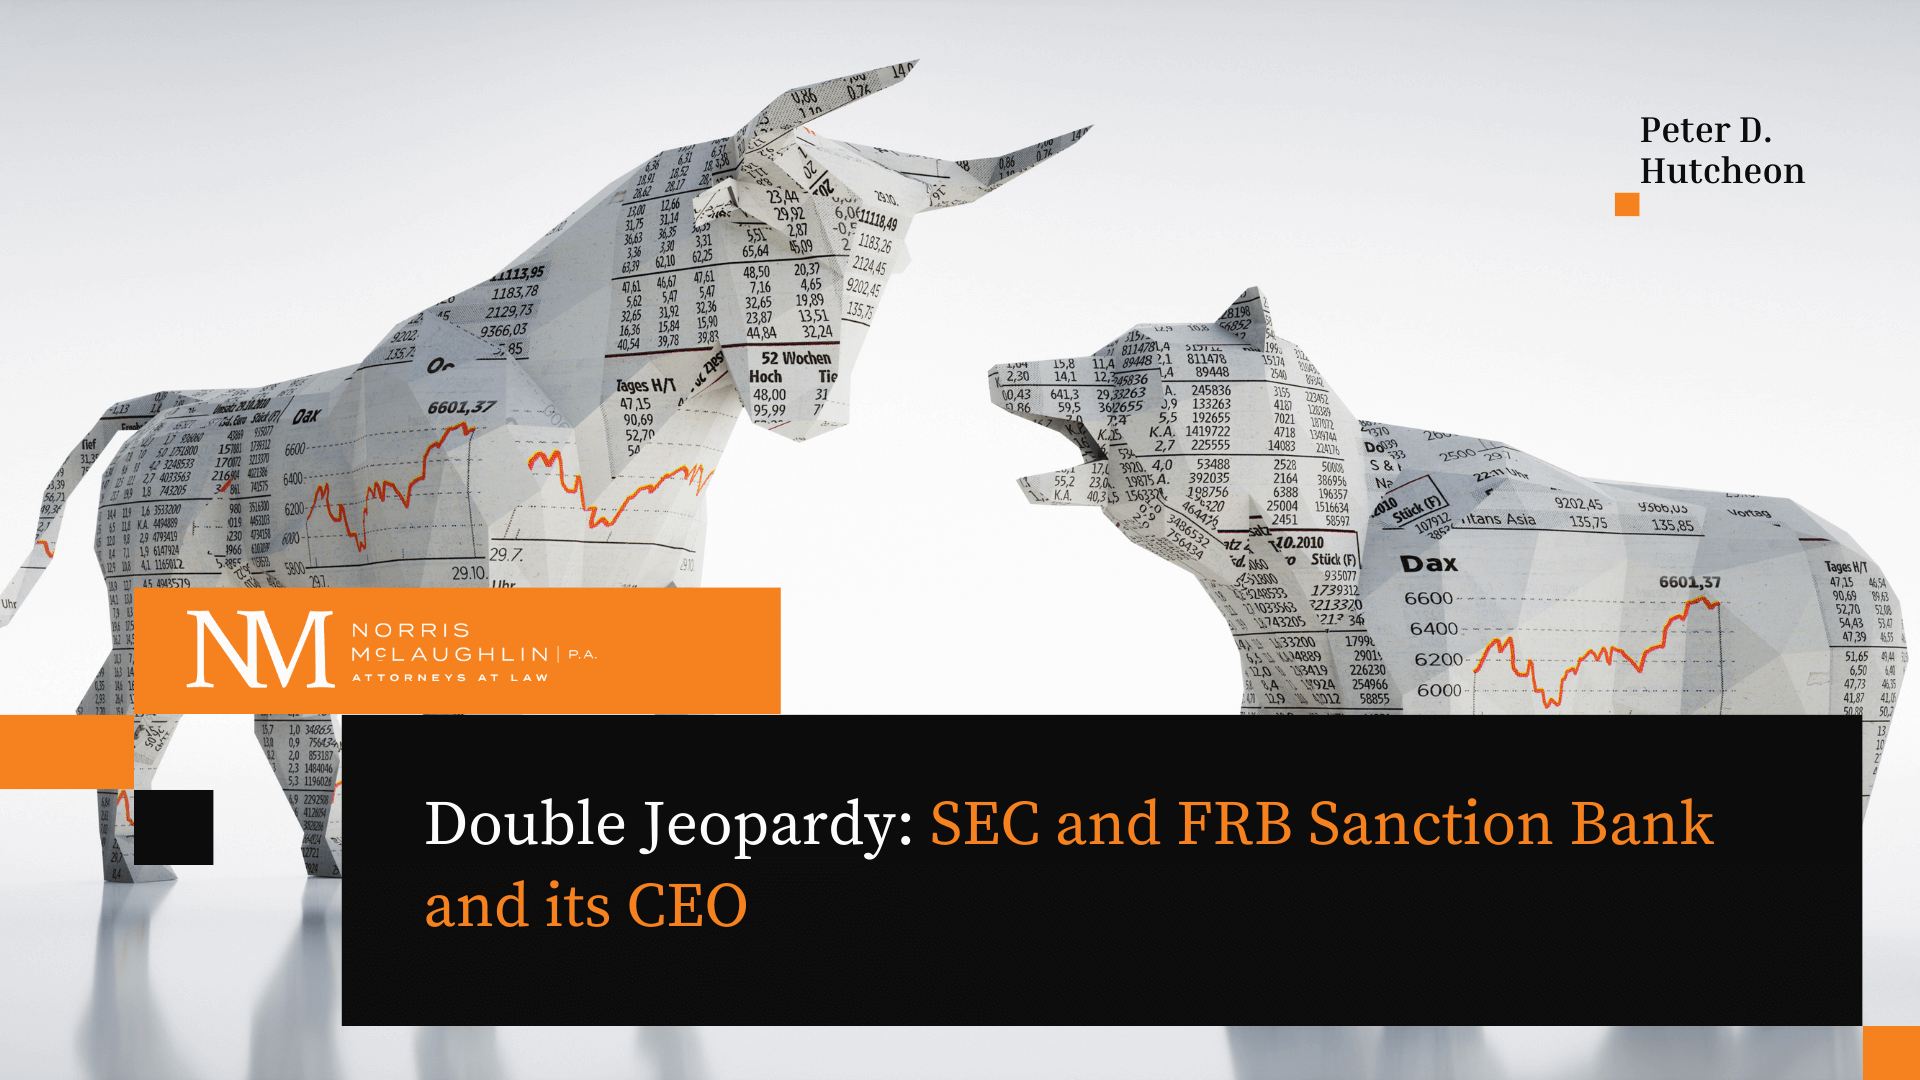 Double Jeopardy: SEC and FRB Sanction Bank and its CEO